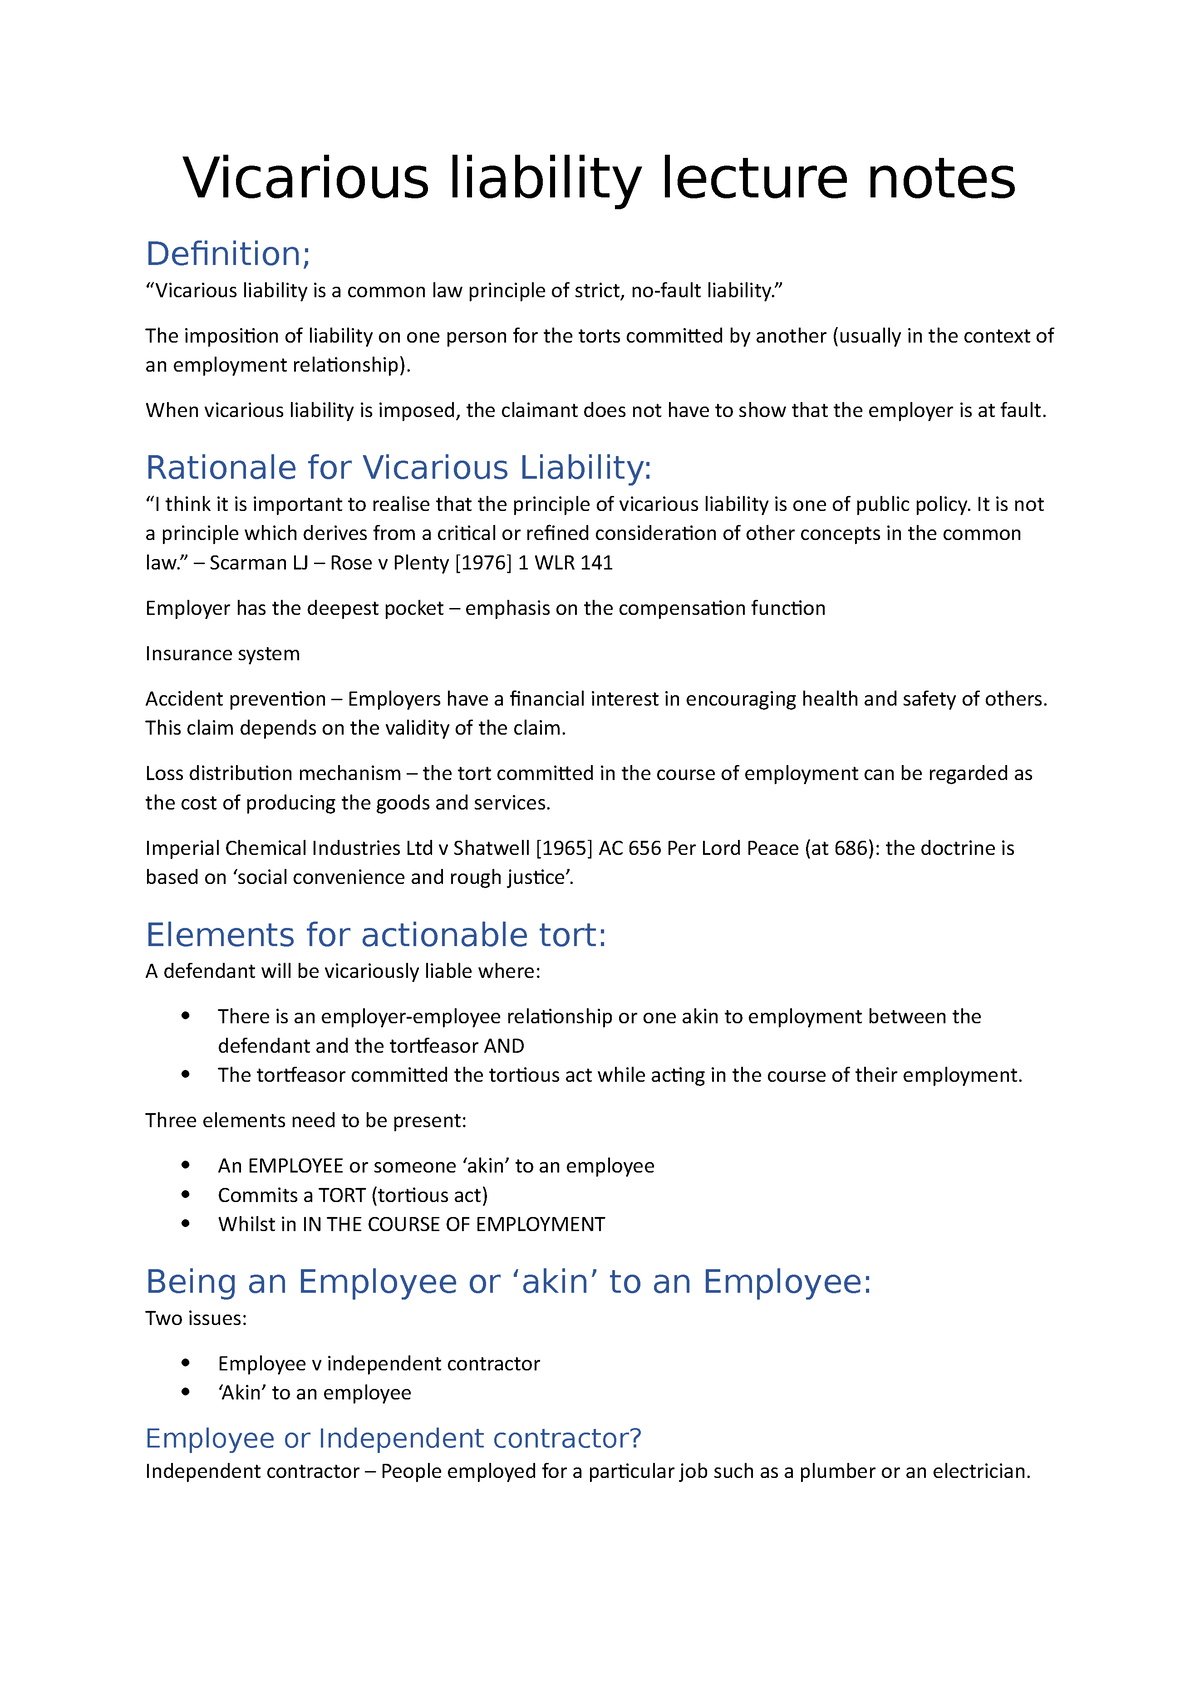 Vicarious liability lecture notes - Vicarious liability lecture notes ...